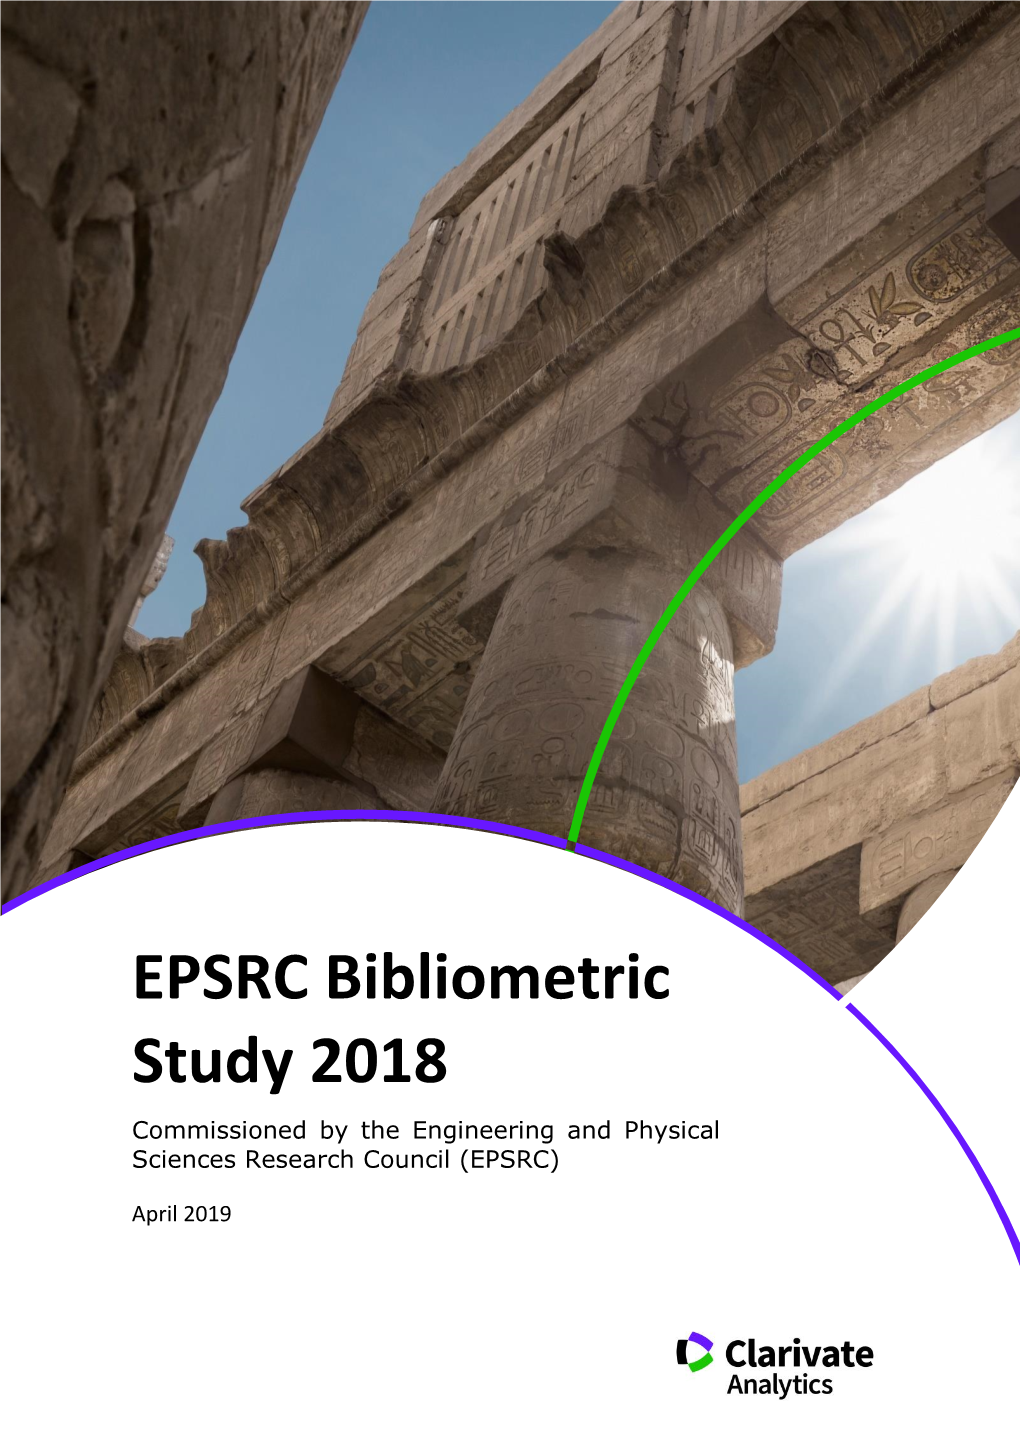 EPSRC Bibliometric Study 2018 Commissioned by the Engineering and Physical Sciences Research Council (EPSRC)